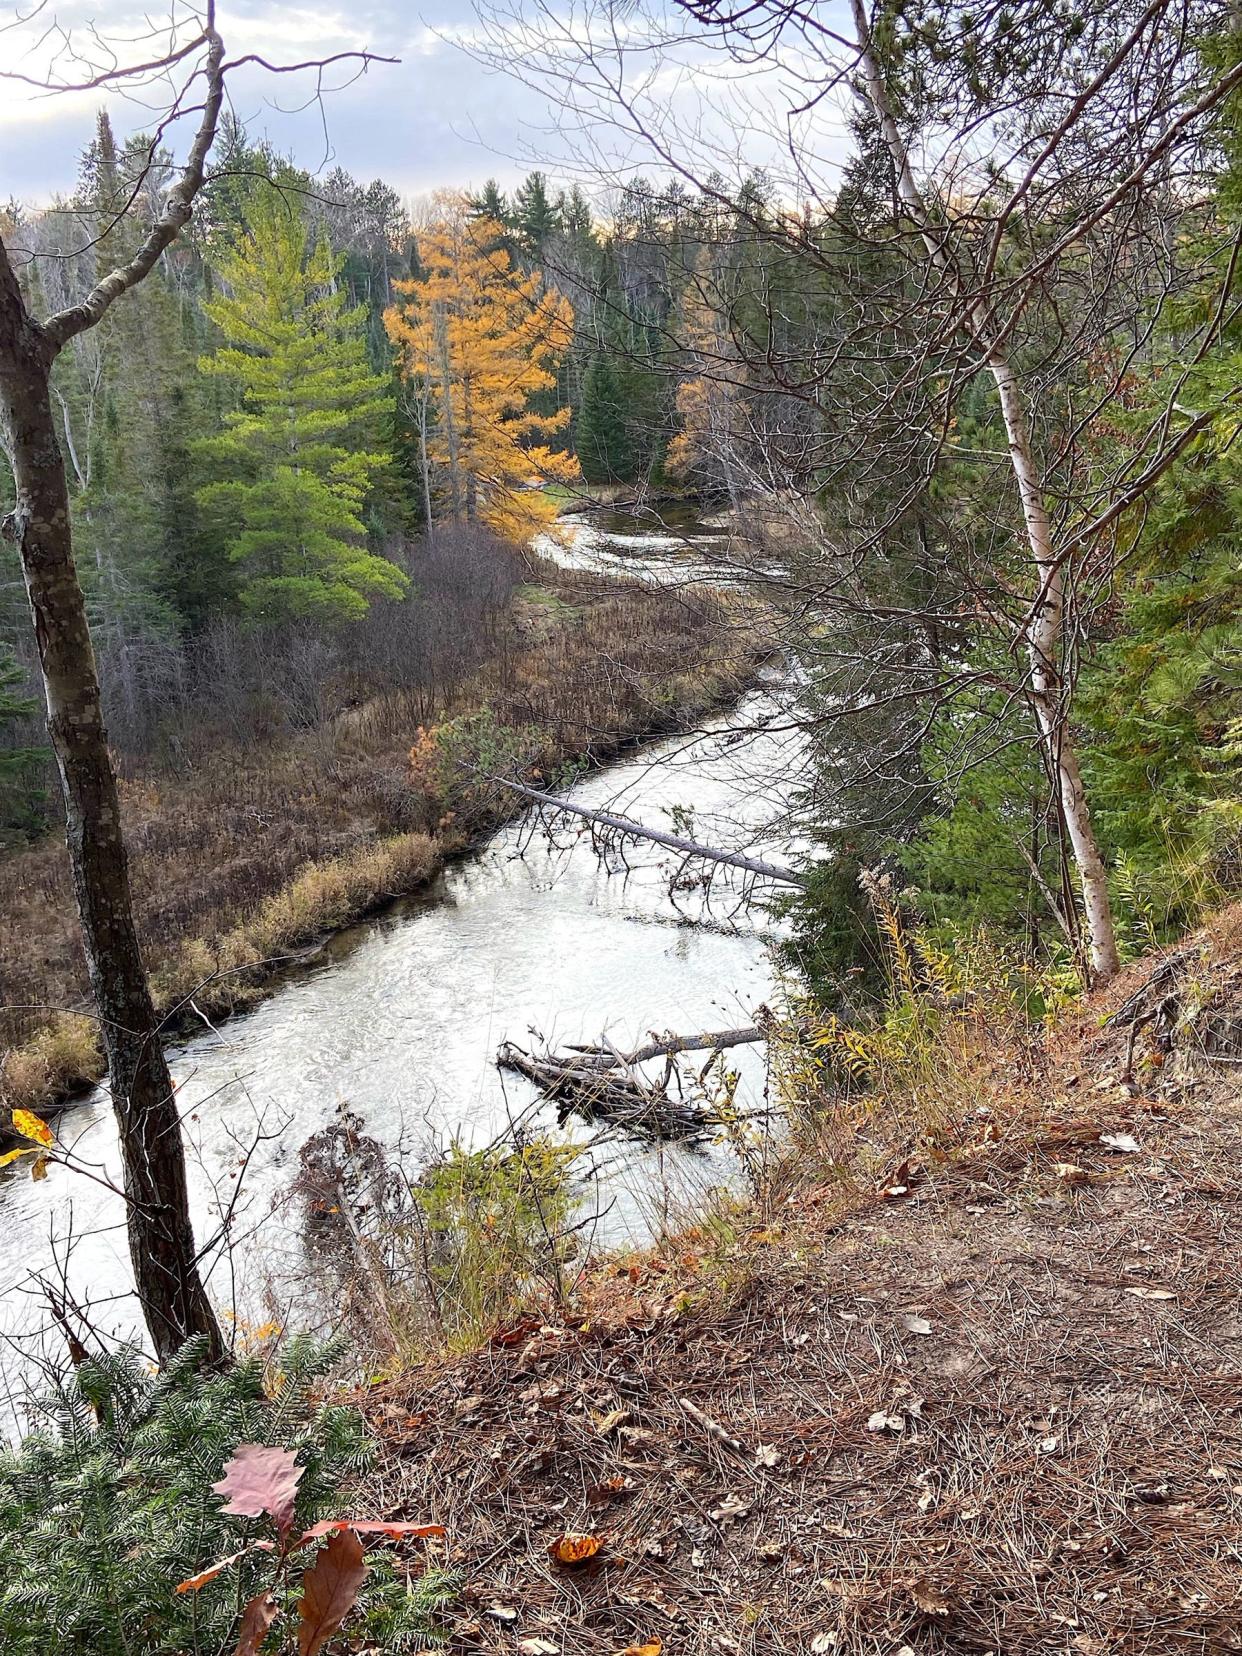 A view of the Pigeon River is seen.